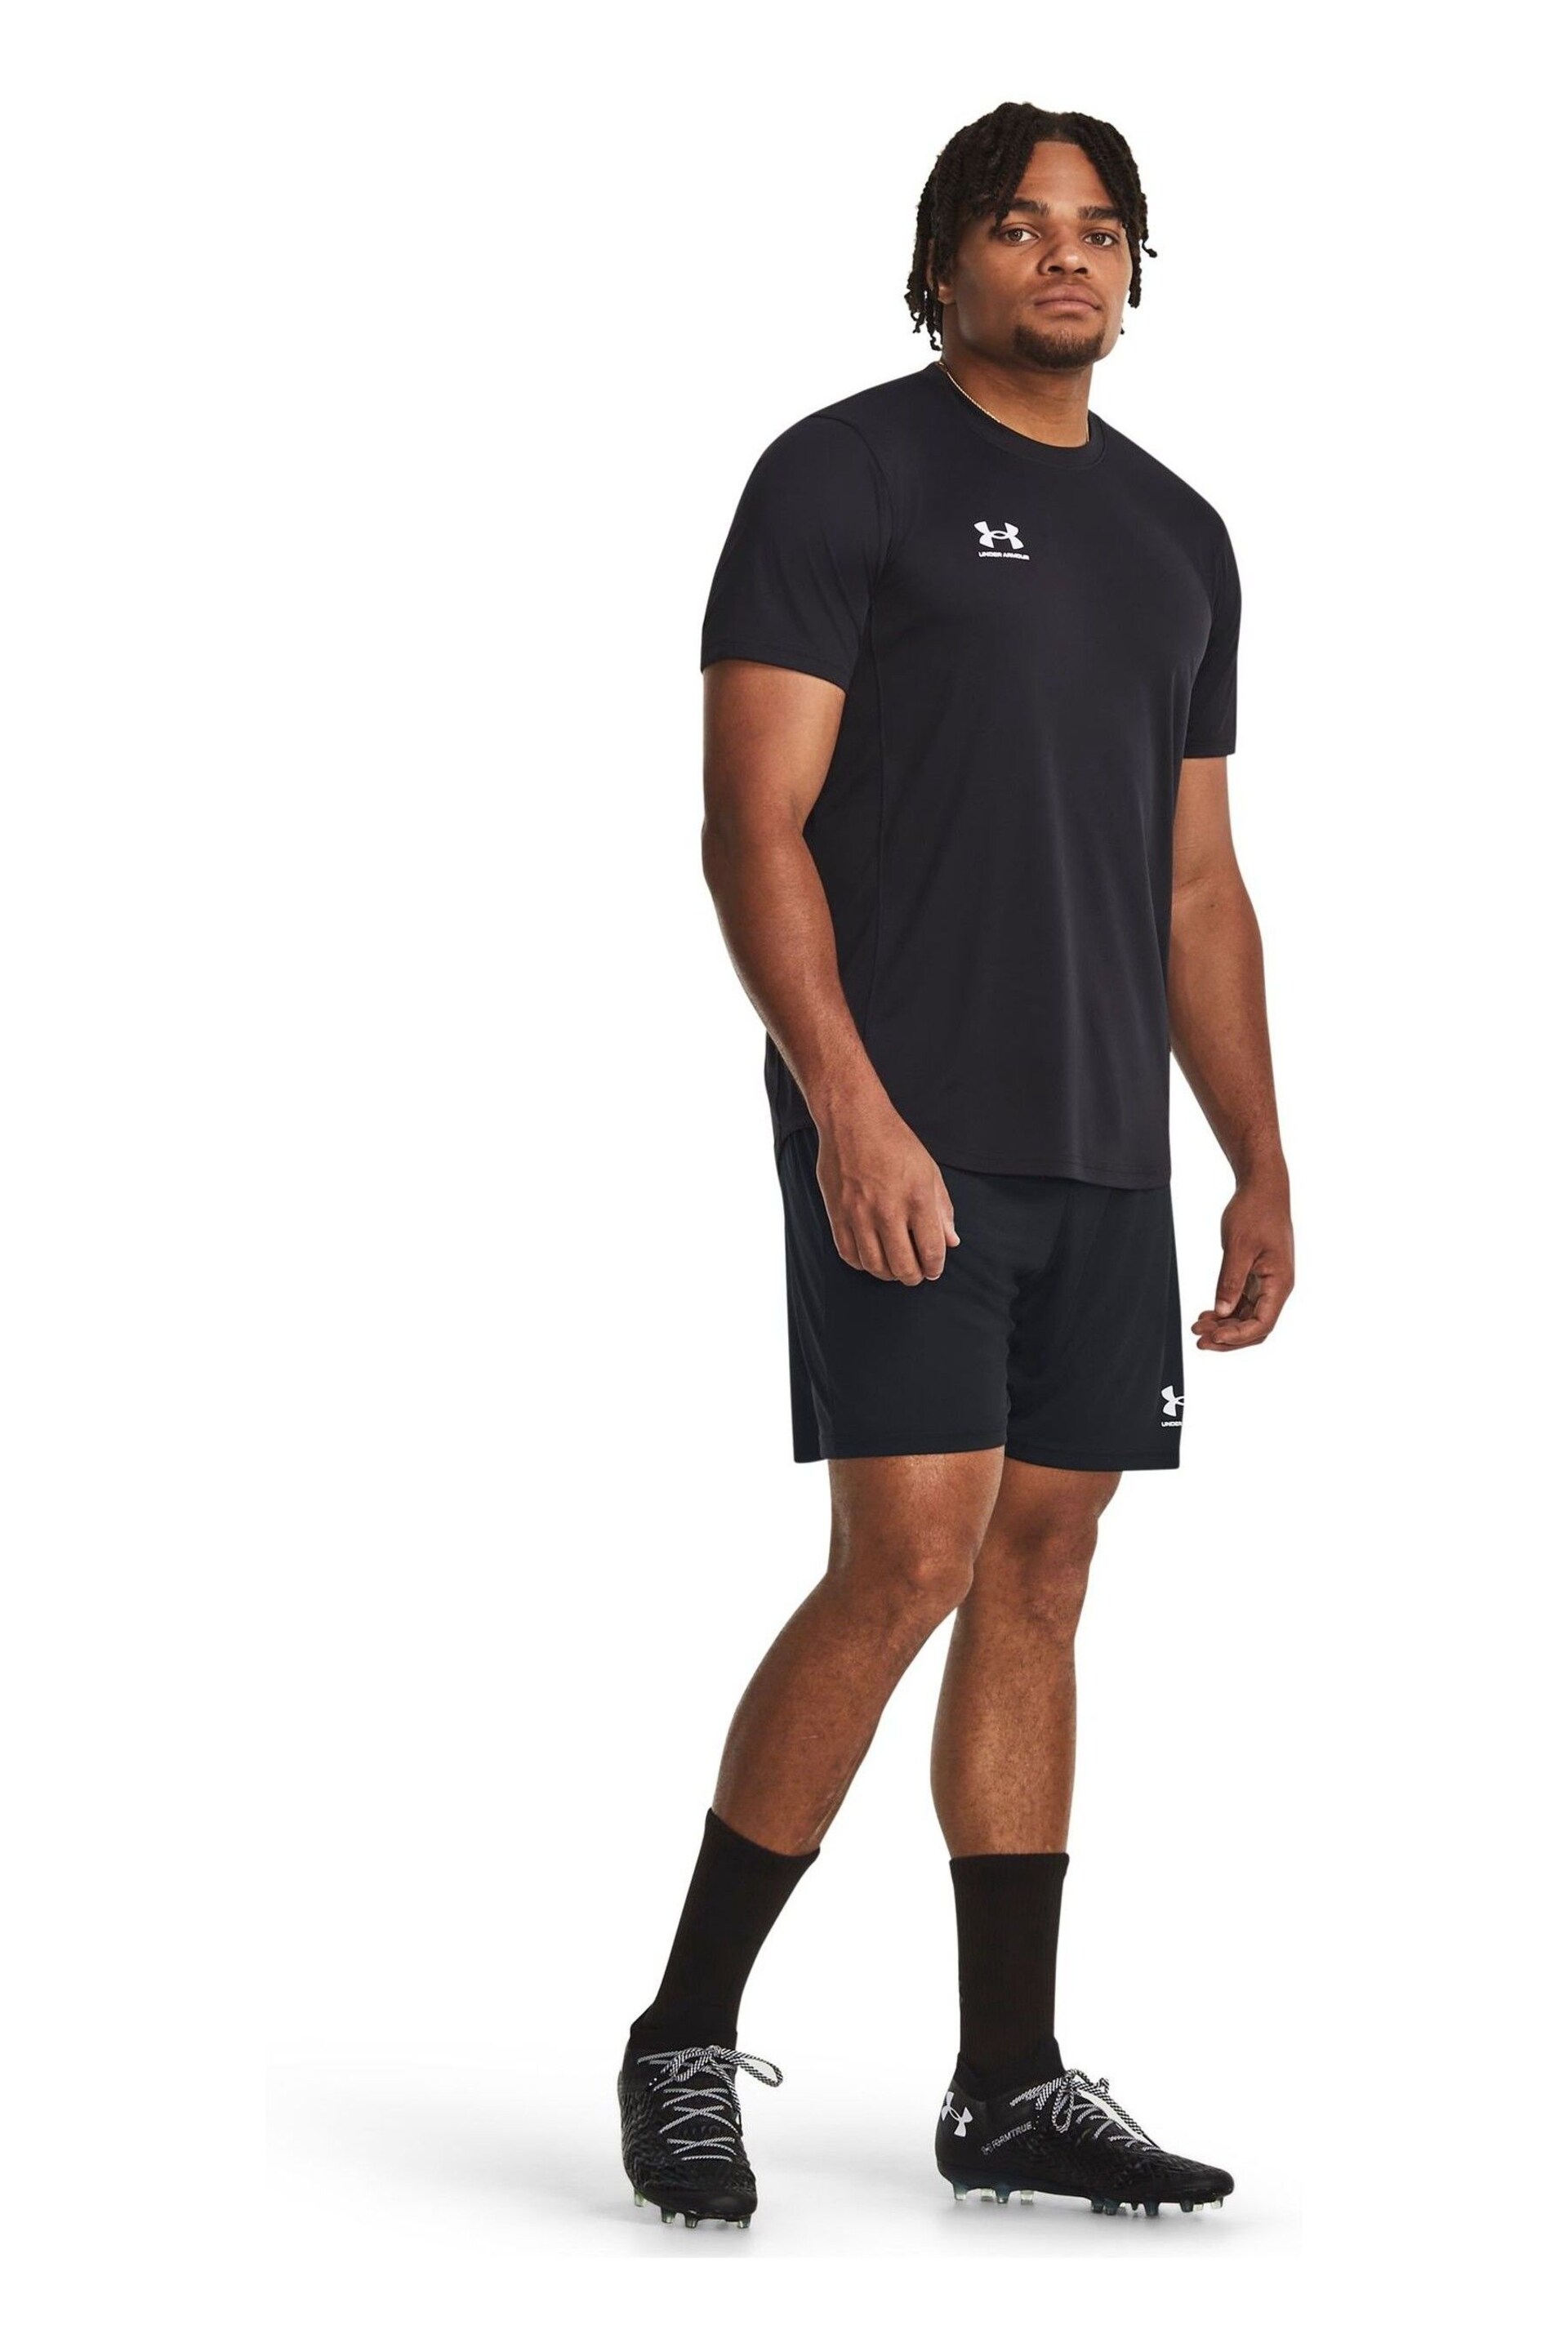 Under Armour Black/White Challenger Knit Shorts - Image 3 of 5